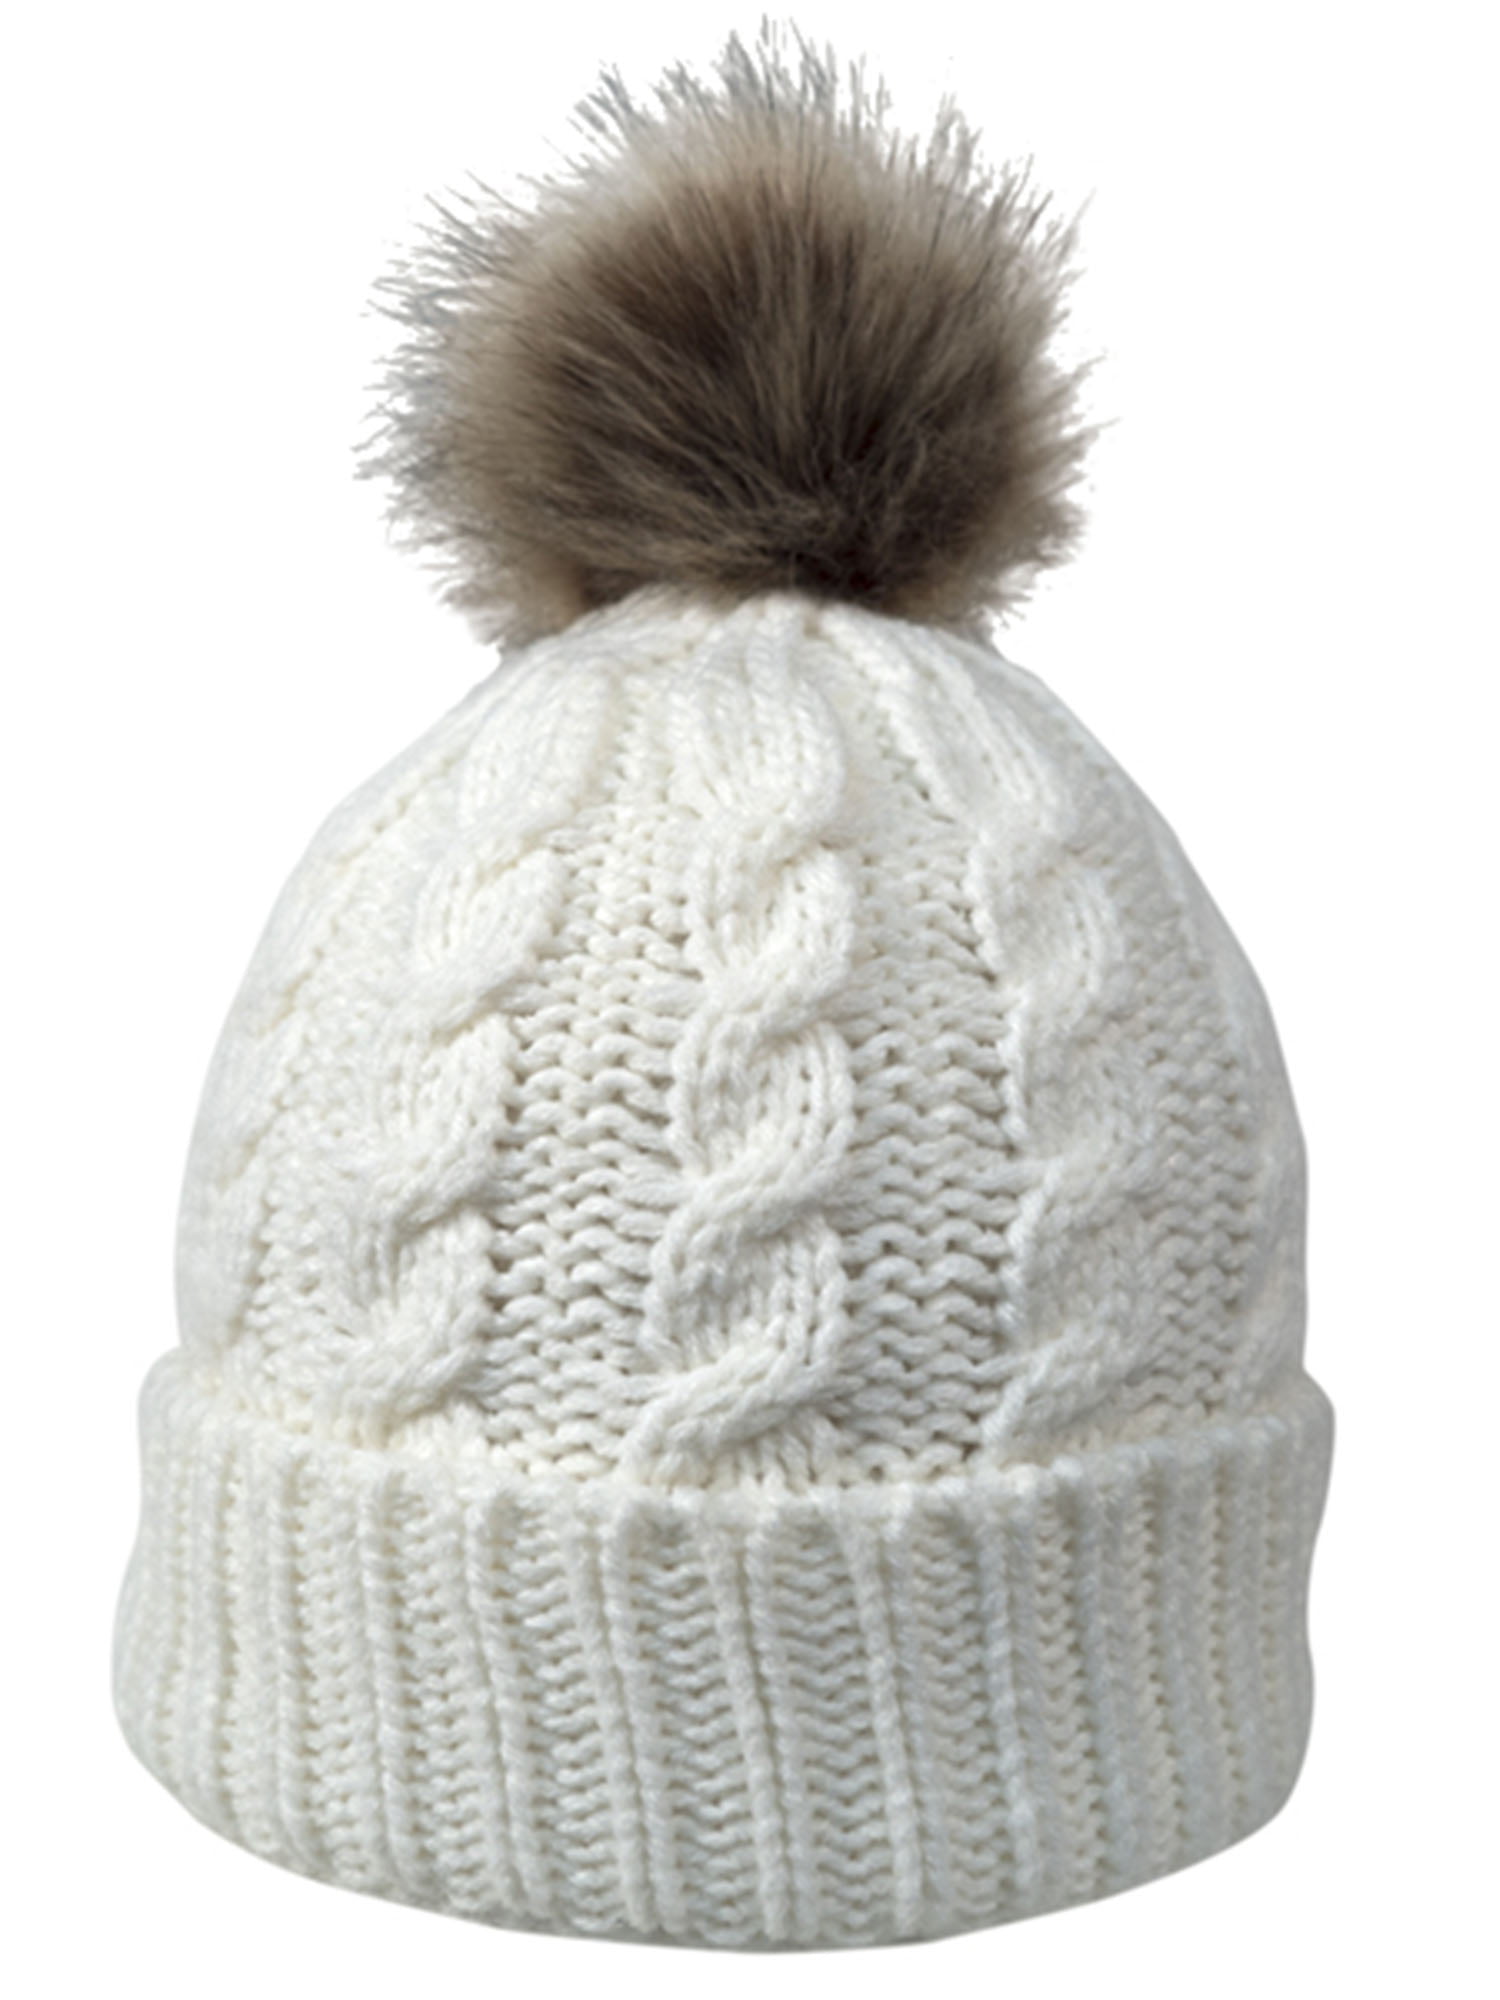 Adult Unisex Men Women Result HDi Quest Winter Warm Knitted Hat with Pom Pom 